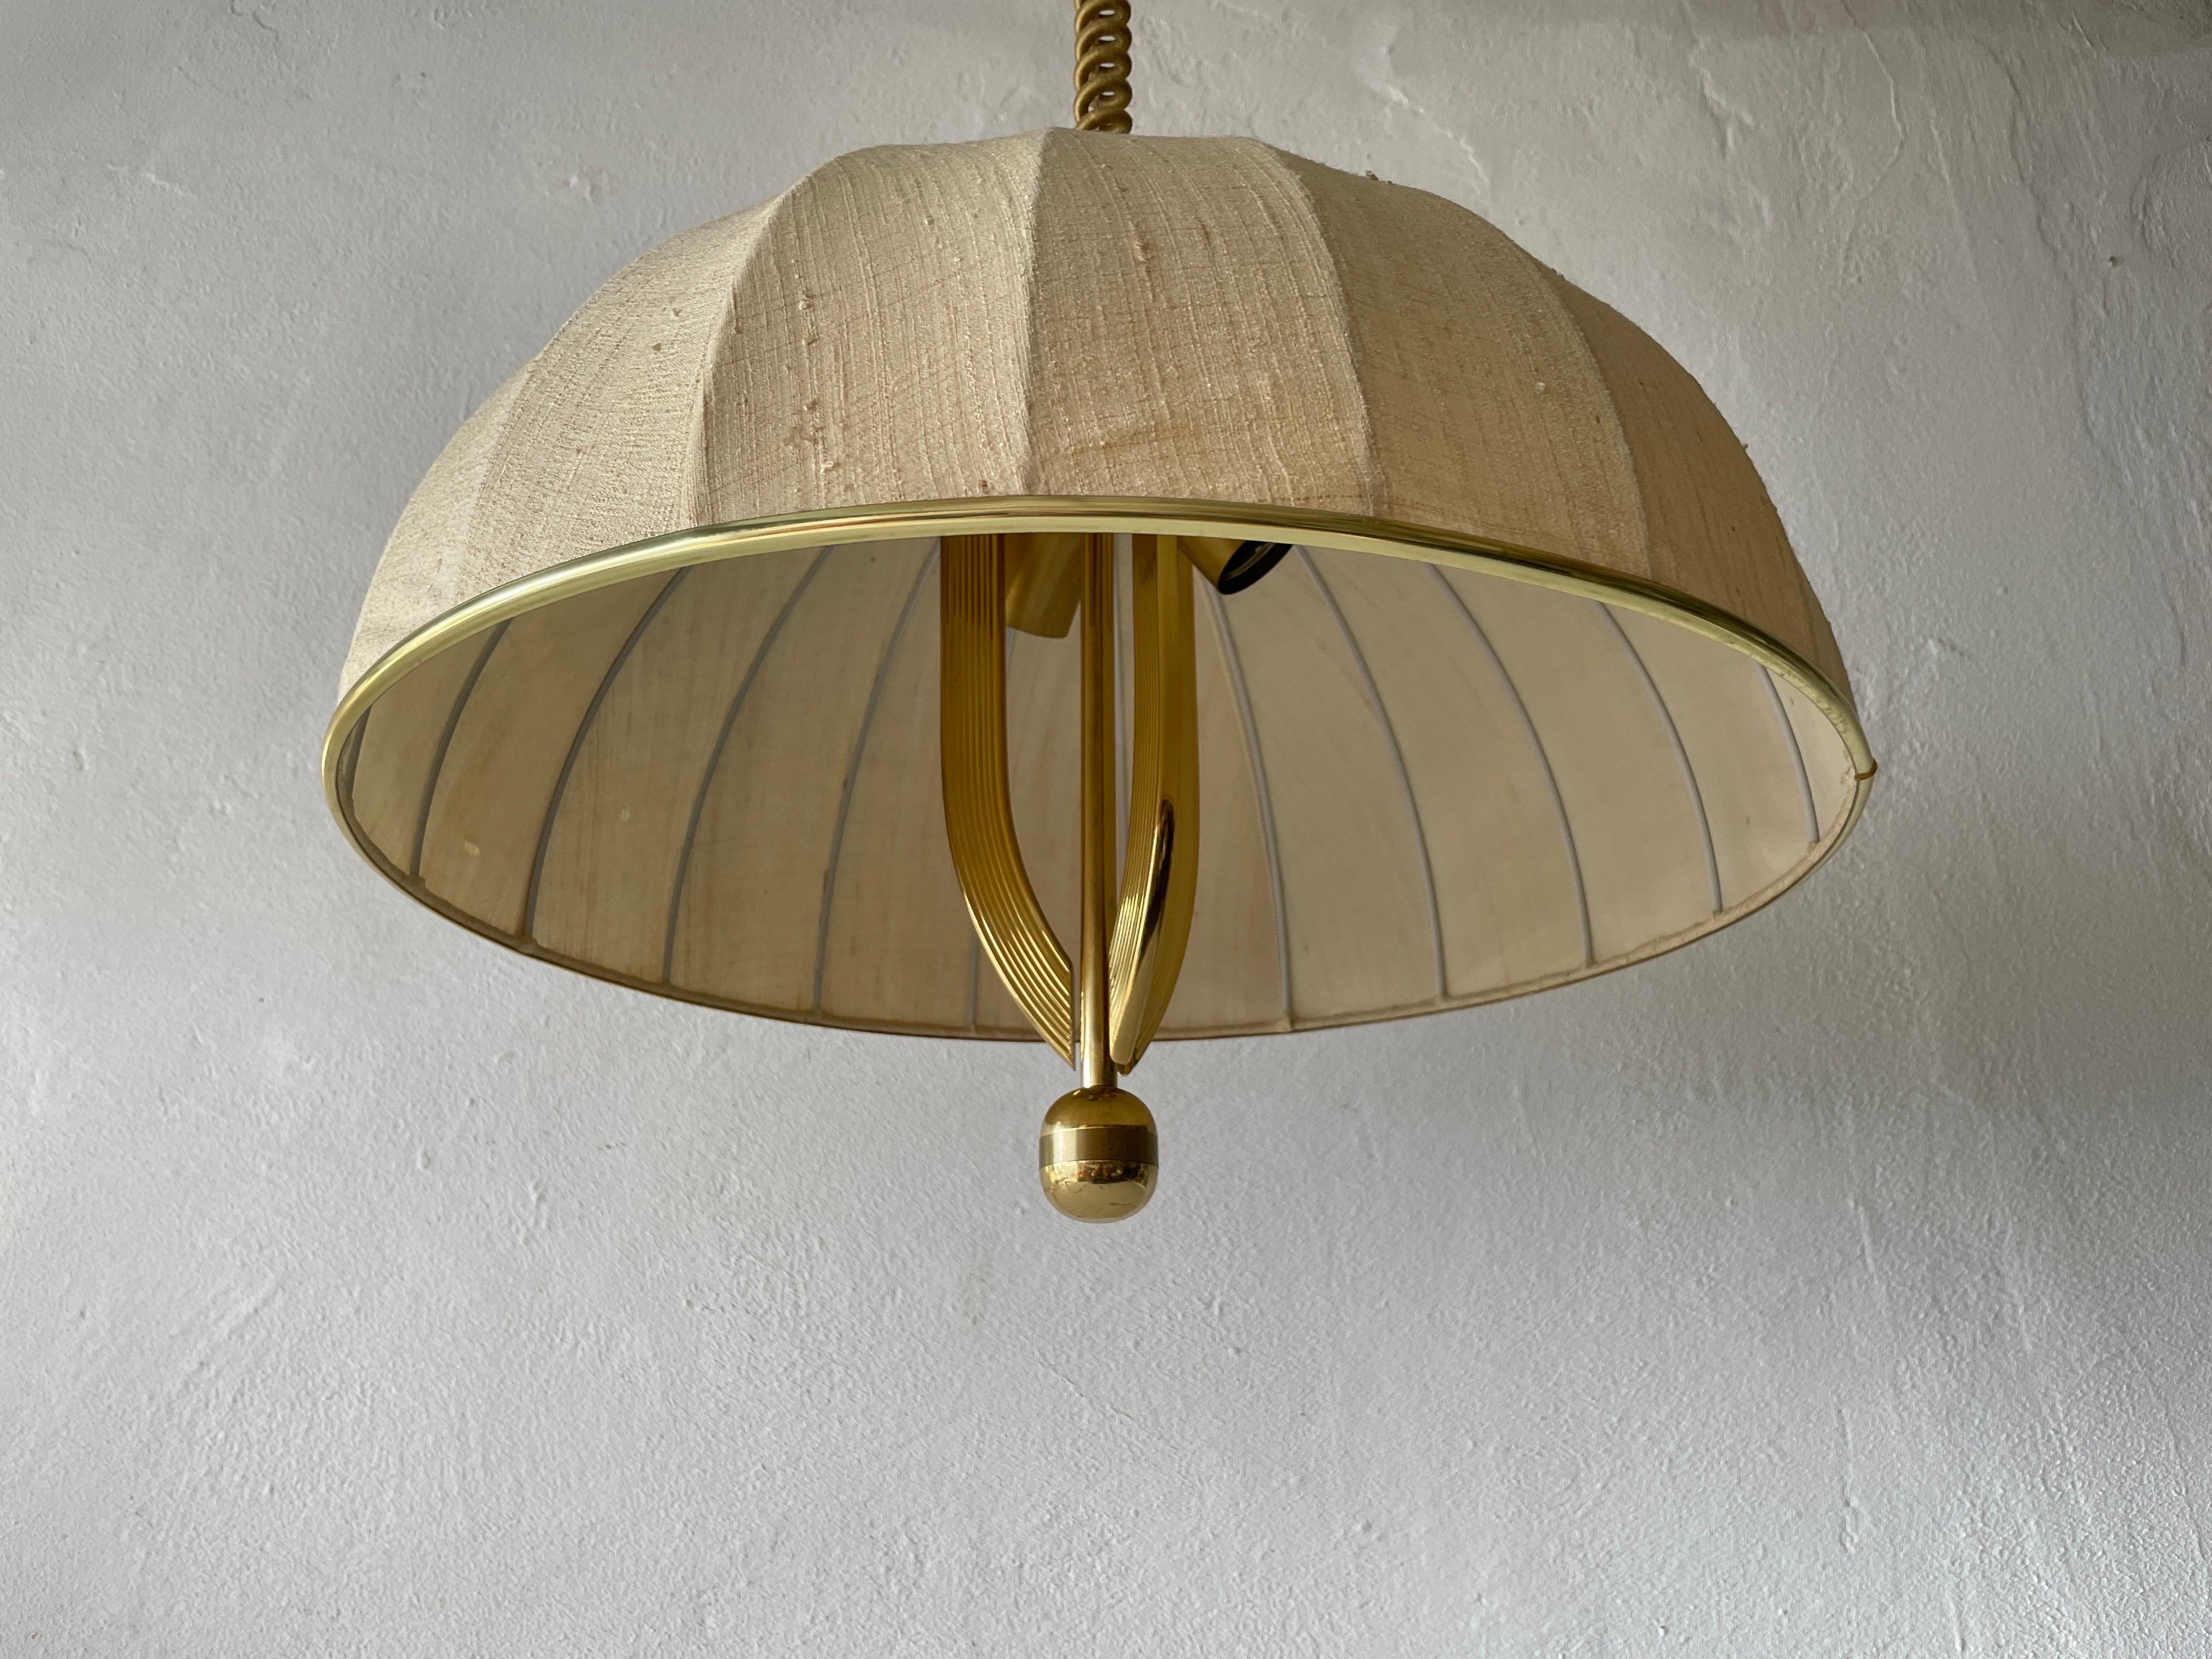 Brass Body & Fabric Shade Mid-Century Modern Pendant Lamp by WKR, 1970s, Germany

Brass body & fabric shade
Manufactured in Germany

This lamp works with 3 x E27 light bulbs.

Measurements: 
Height between 80 cm and 110 cm
Lampshade